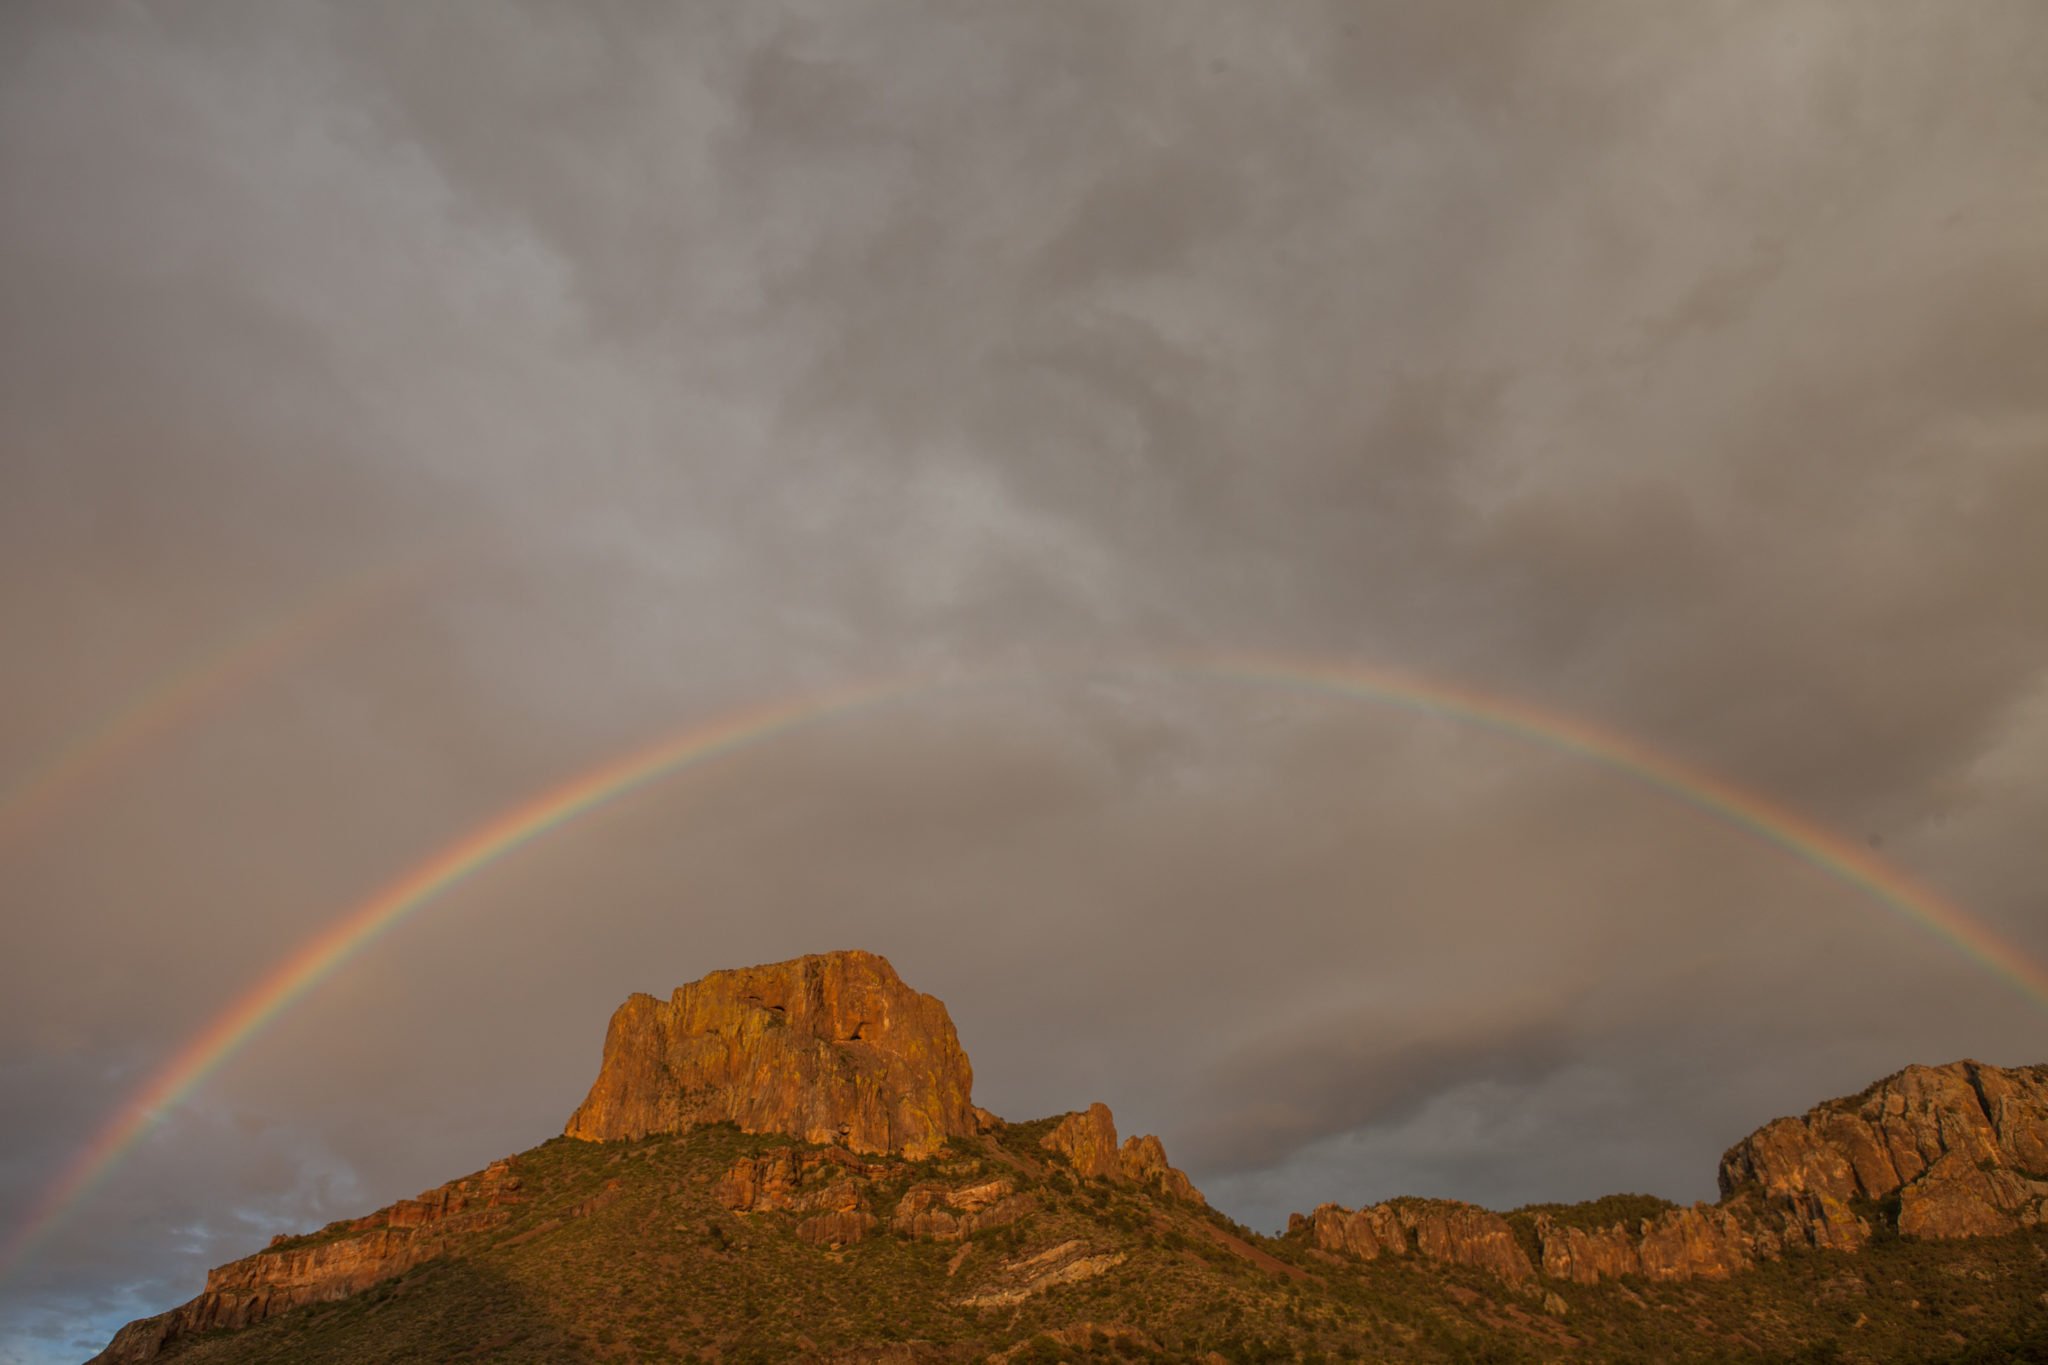 A double rainbow appeared at sunset over Casa Grande after an evening rain in Big Bend National Park in June.